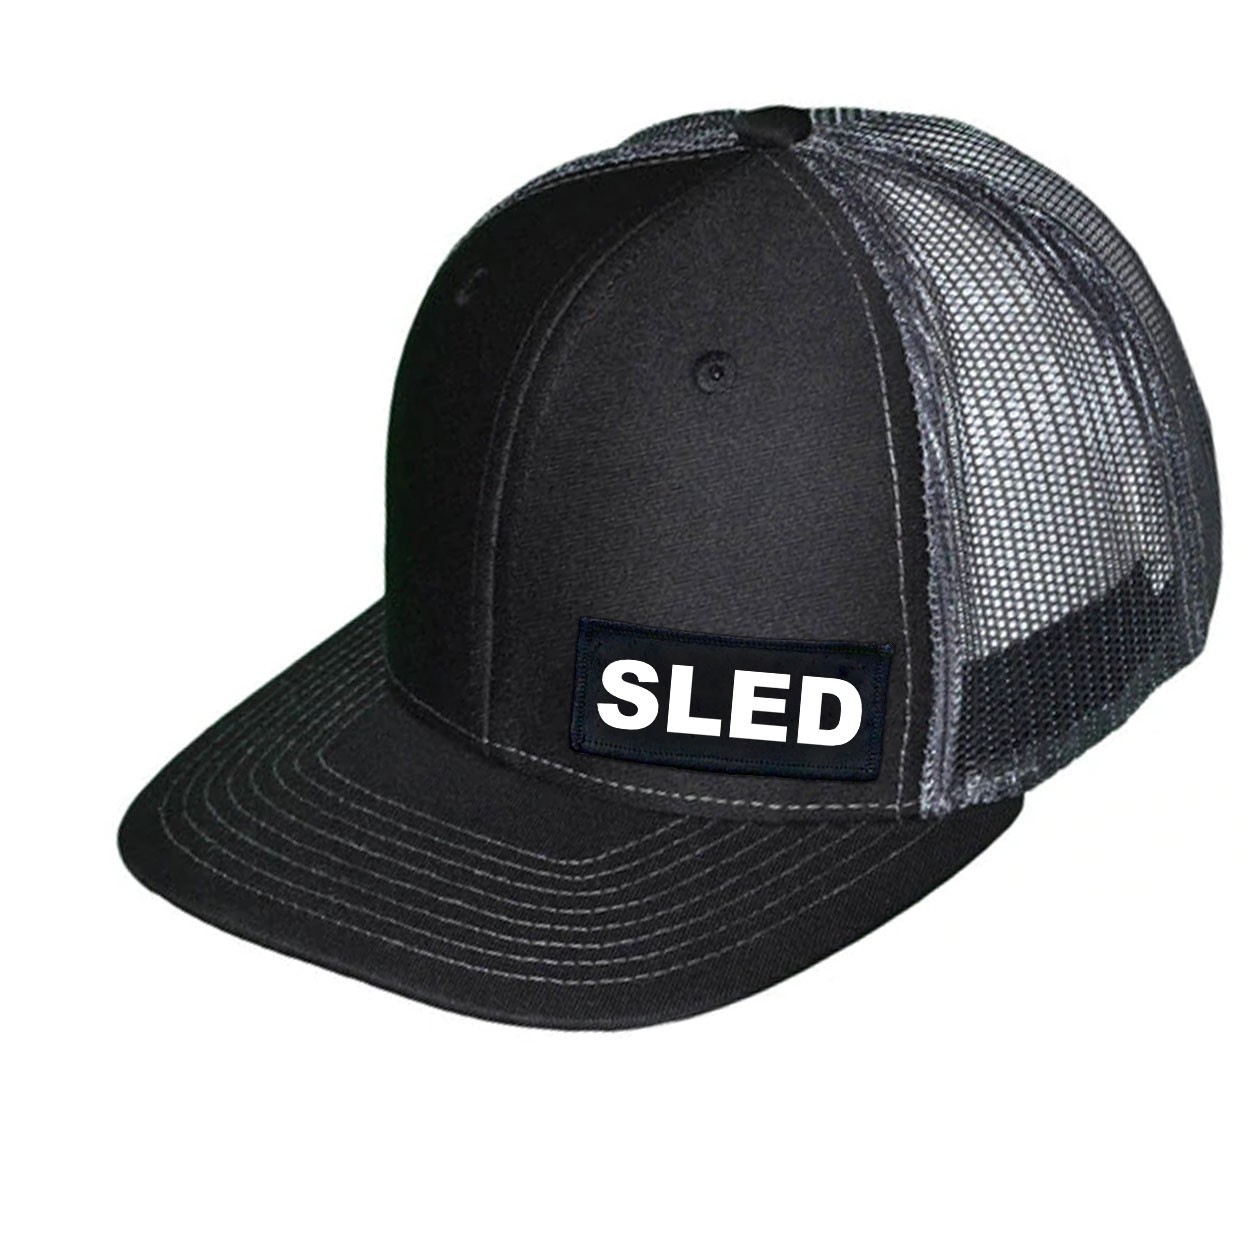 Sled Brand Logo Night Out Woven Patch Snapback Trucker Hat Black/Gray